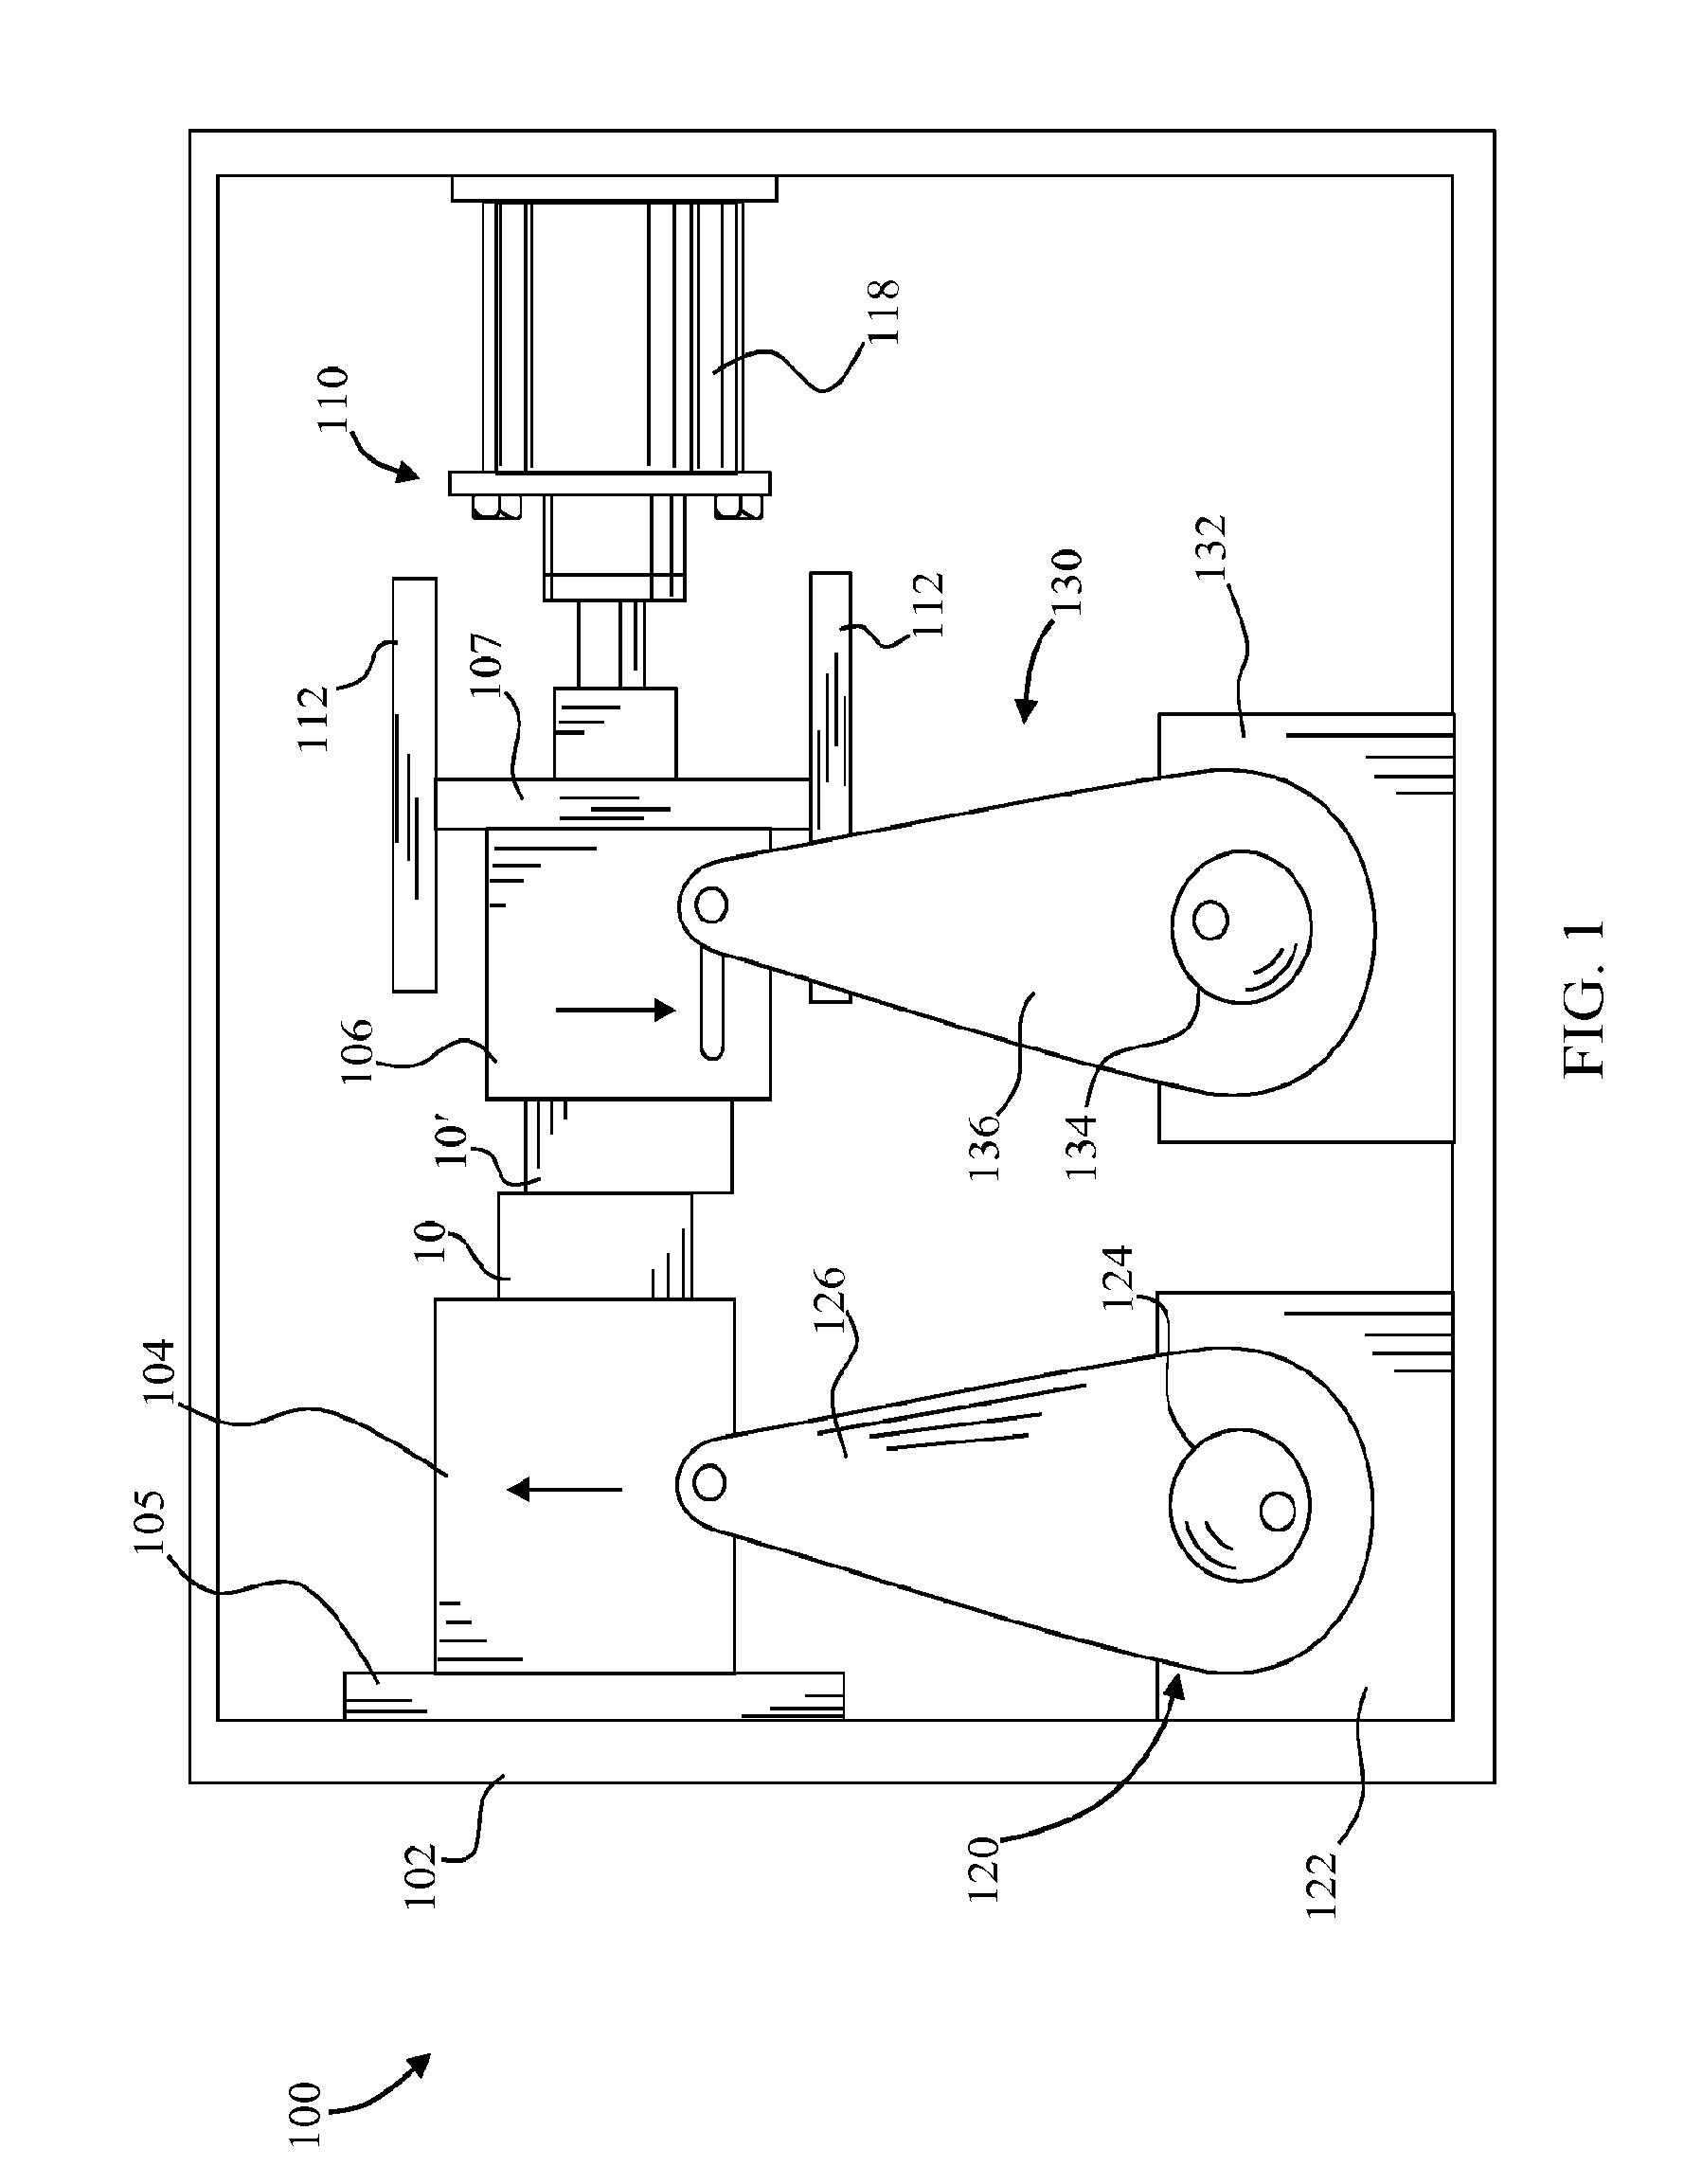 Apparatus for Linear Friction Welding